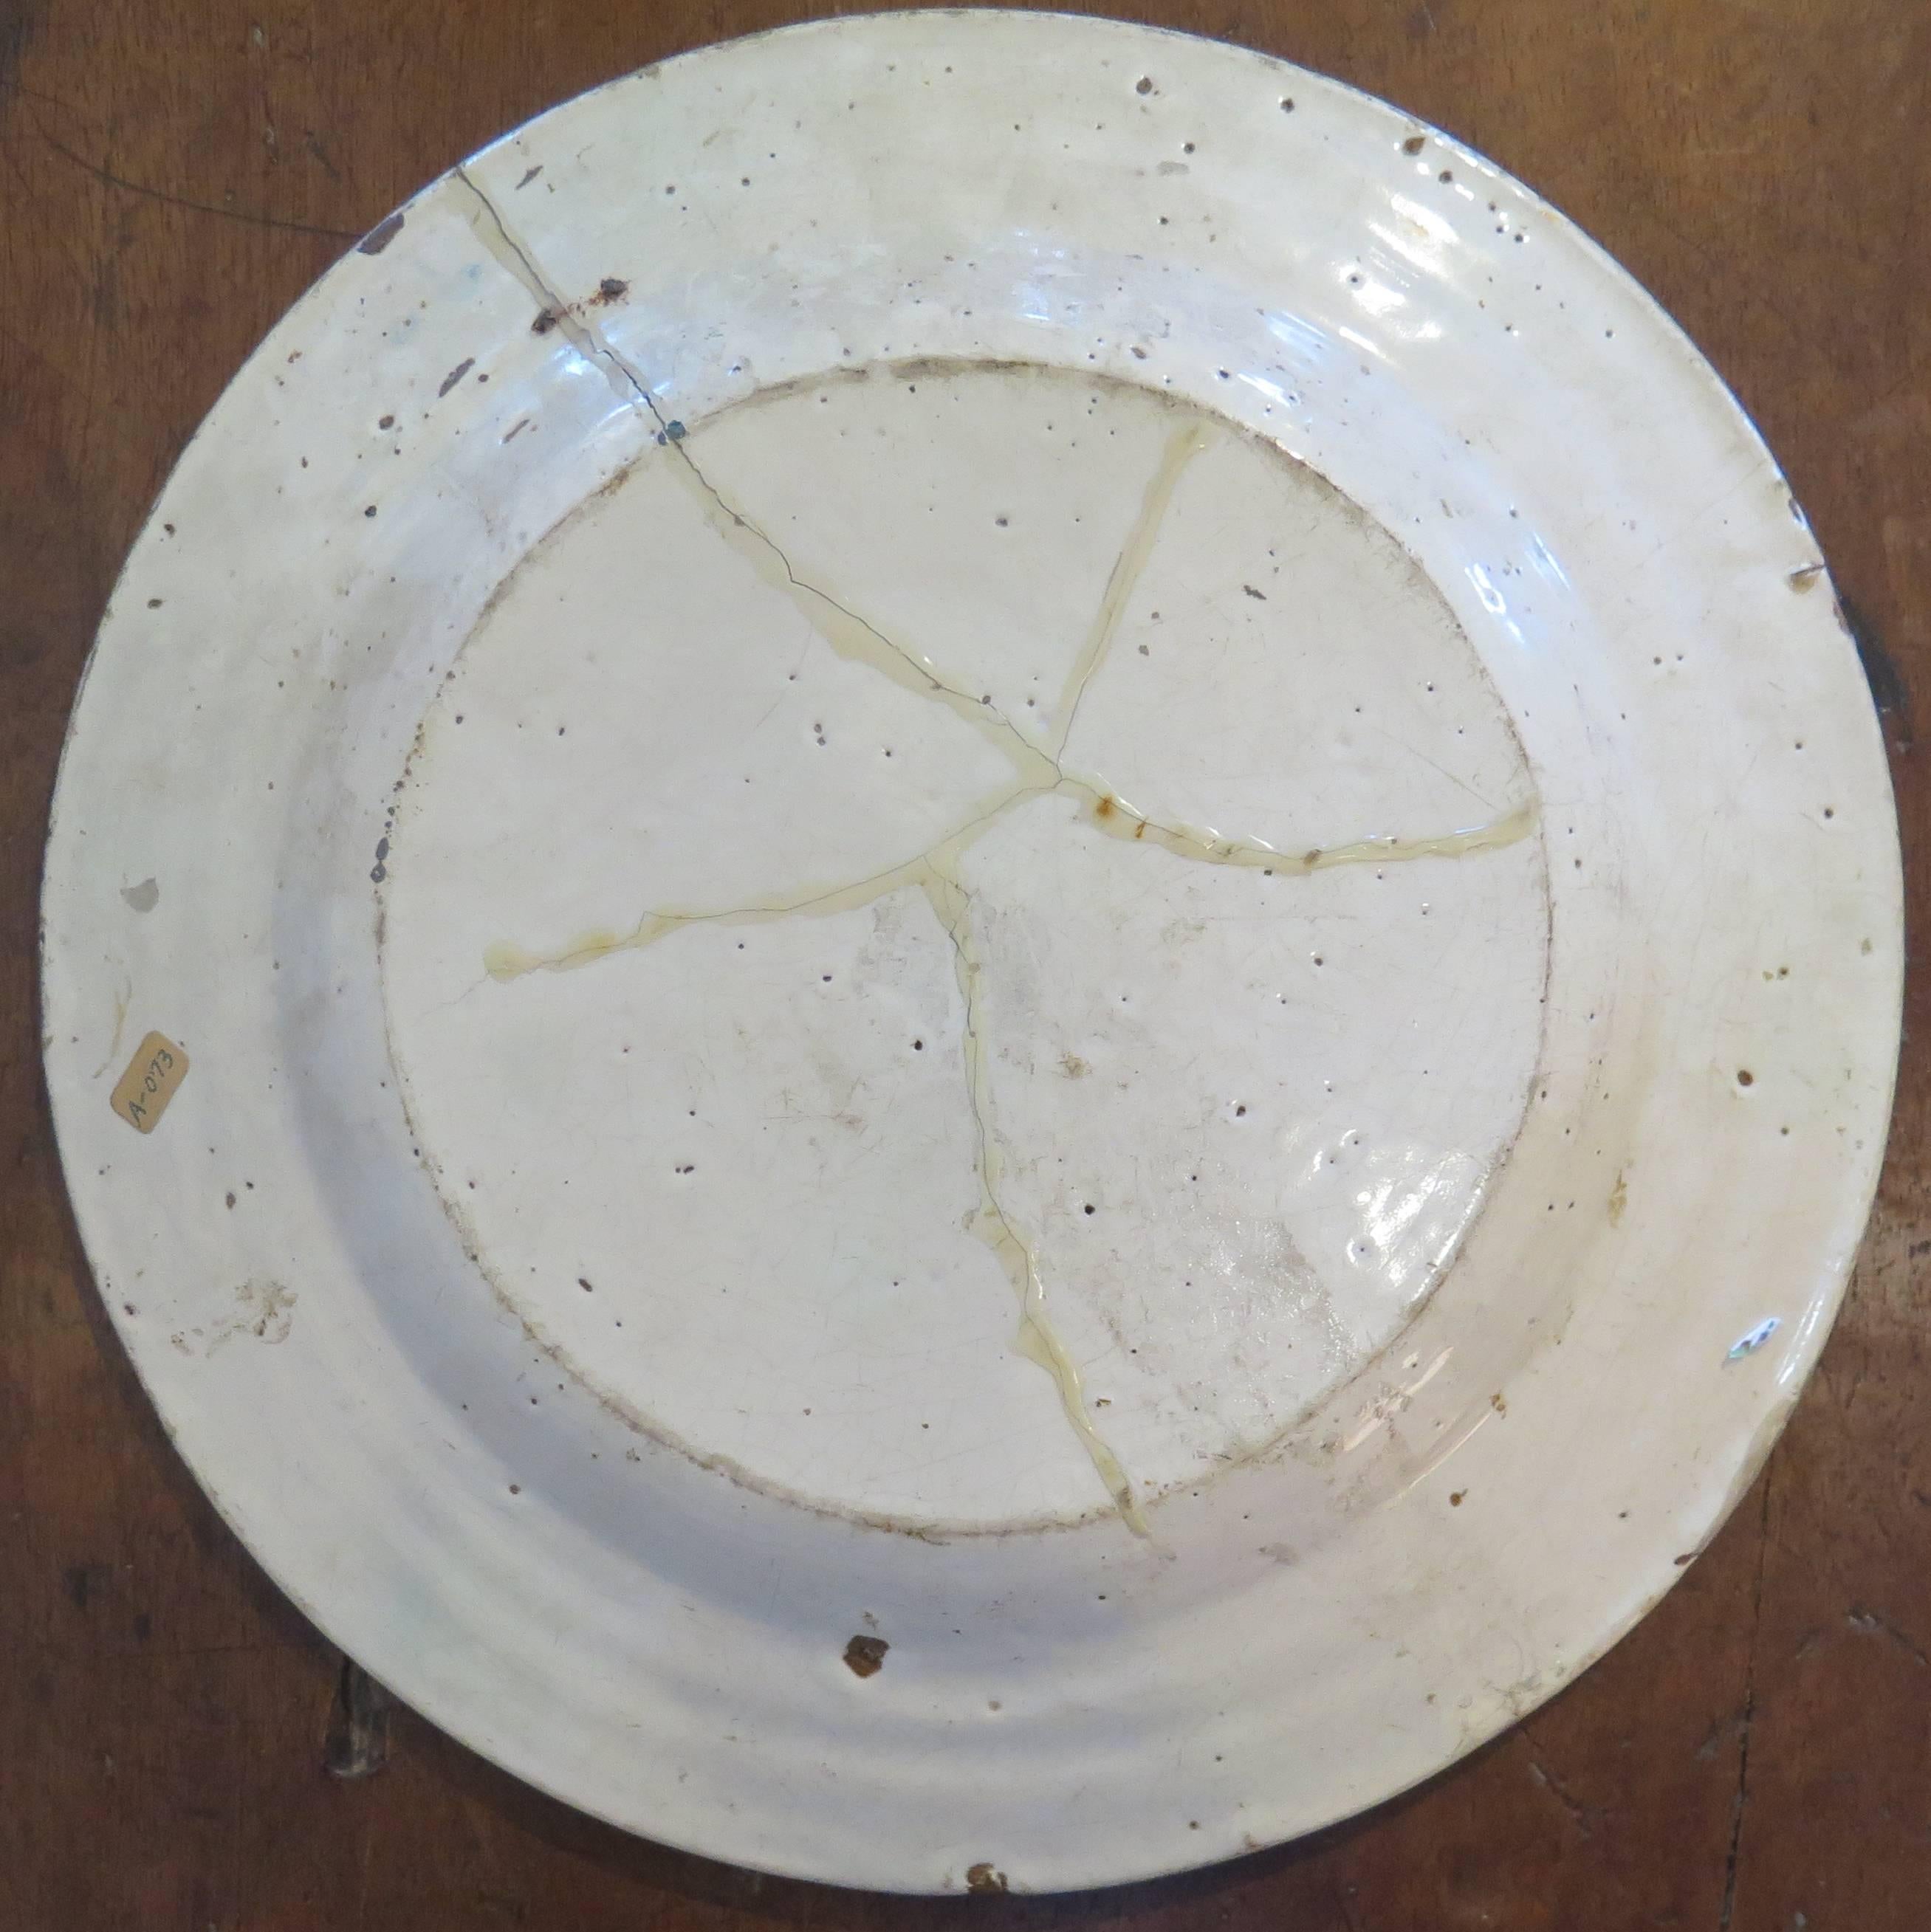 Very fine late 18th century Spanish plate with rabbit motif. Has been cracked and re-glued. Likely Sevilla or Puente del Arzobispo.